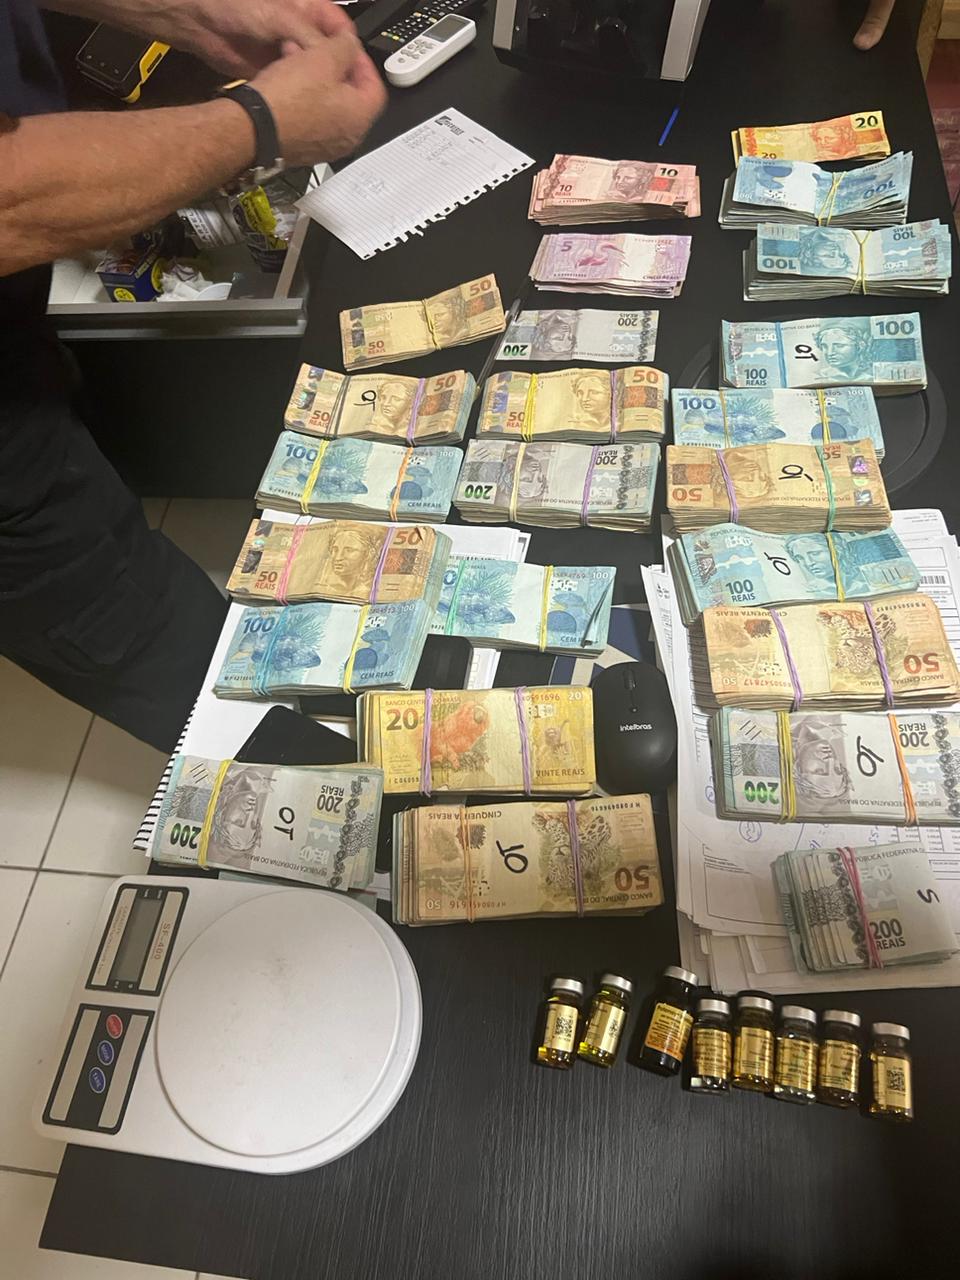 More than R$180,000 in cash was also discovered - Disclosure/Reproduction/ND.